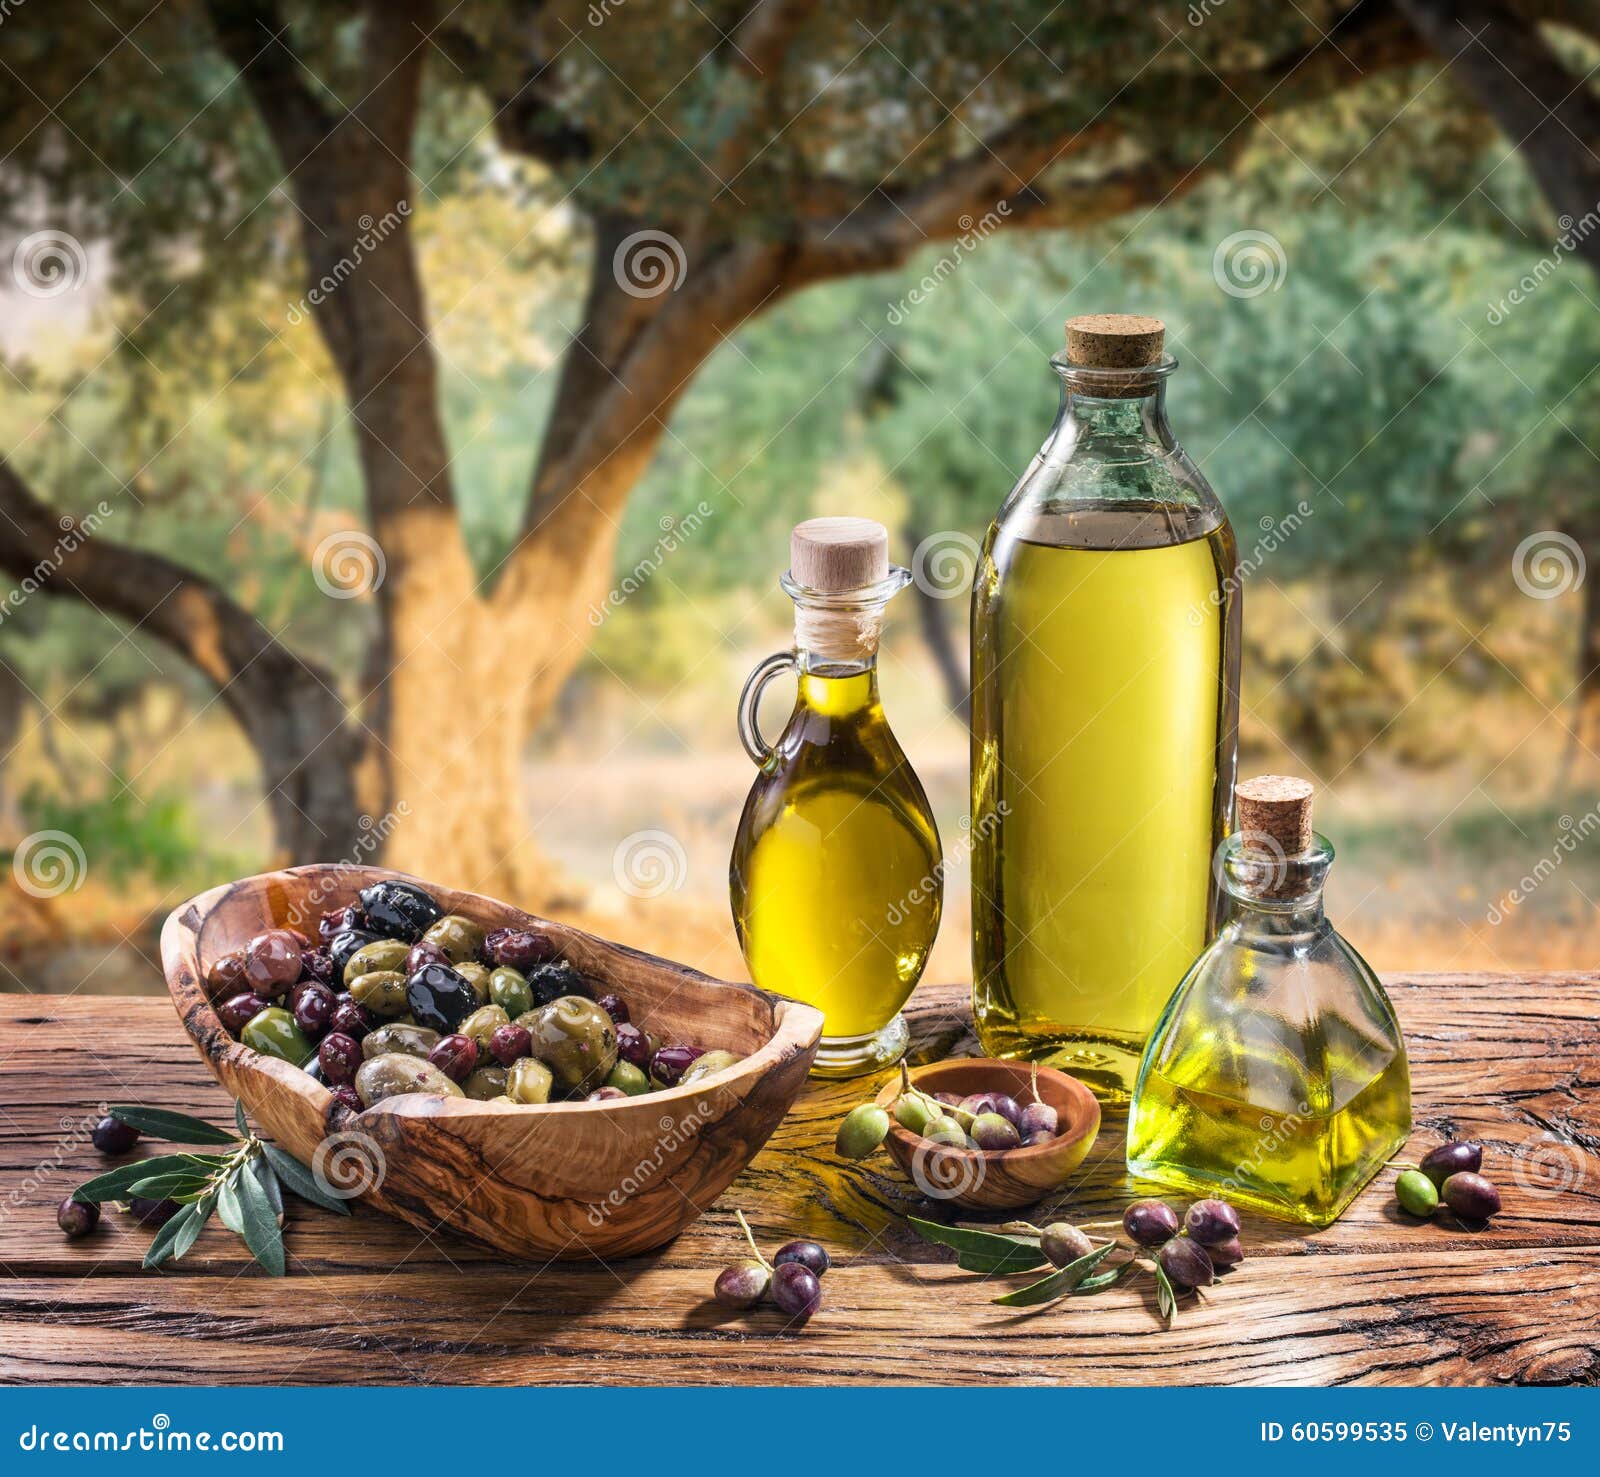 olives and olive oil in a bottle.